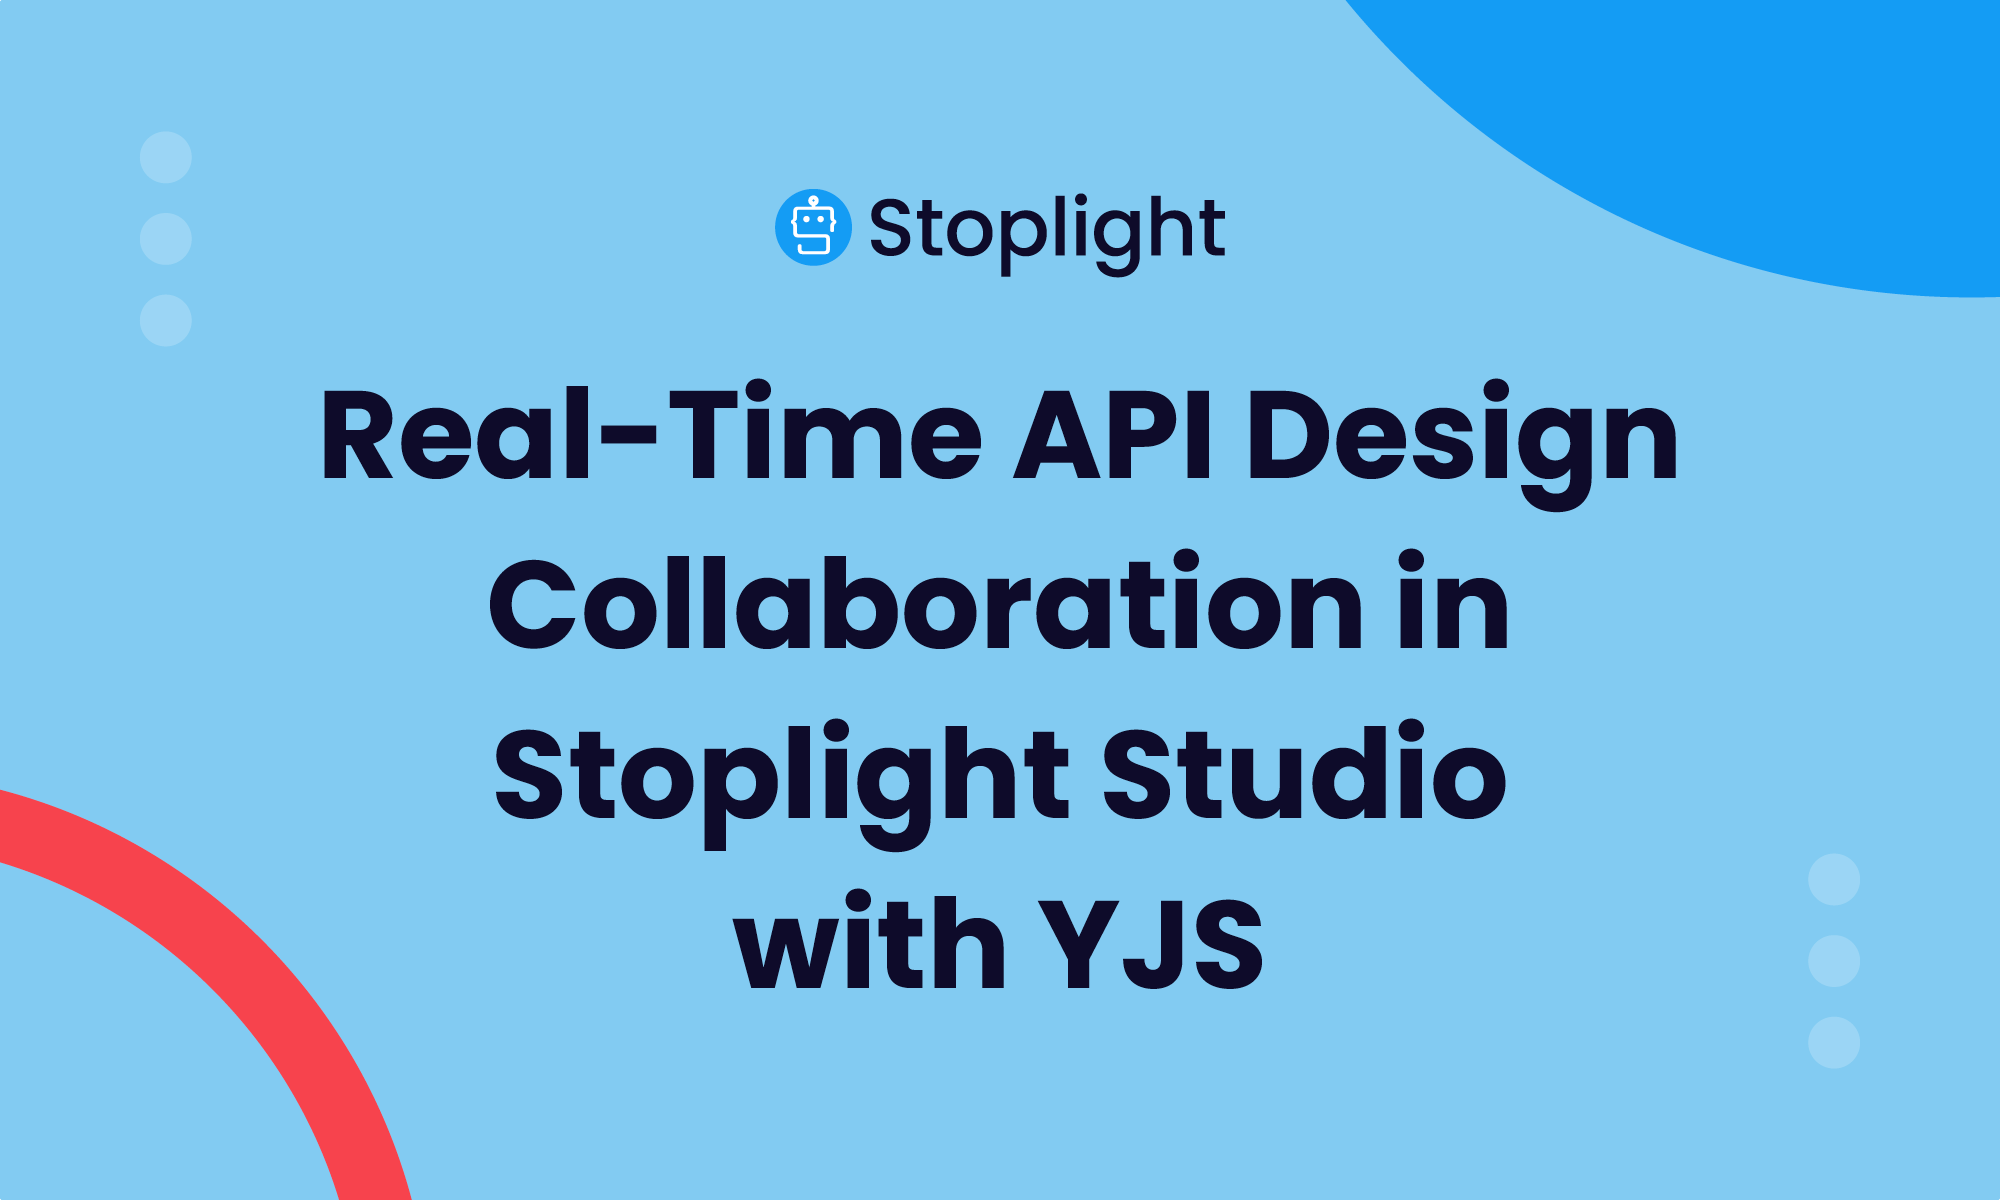 Real-time API Design Collaboration in Stoplight Studio with YJS